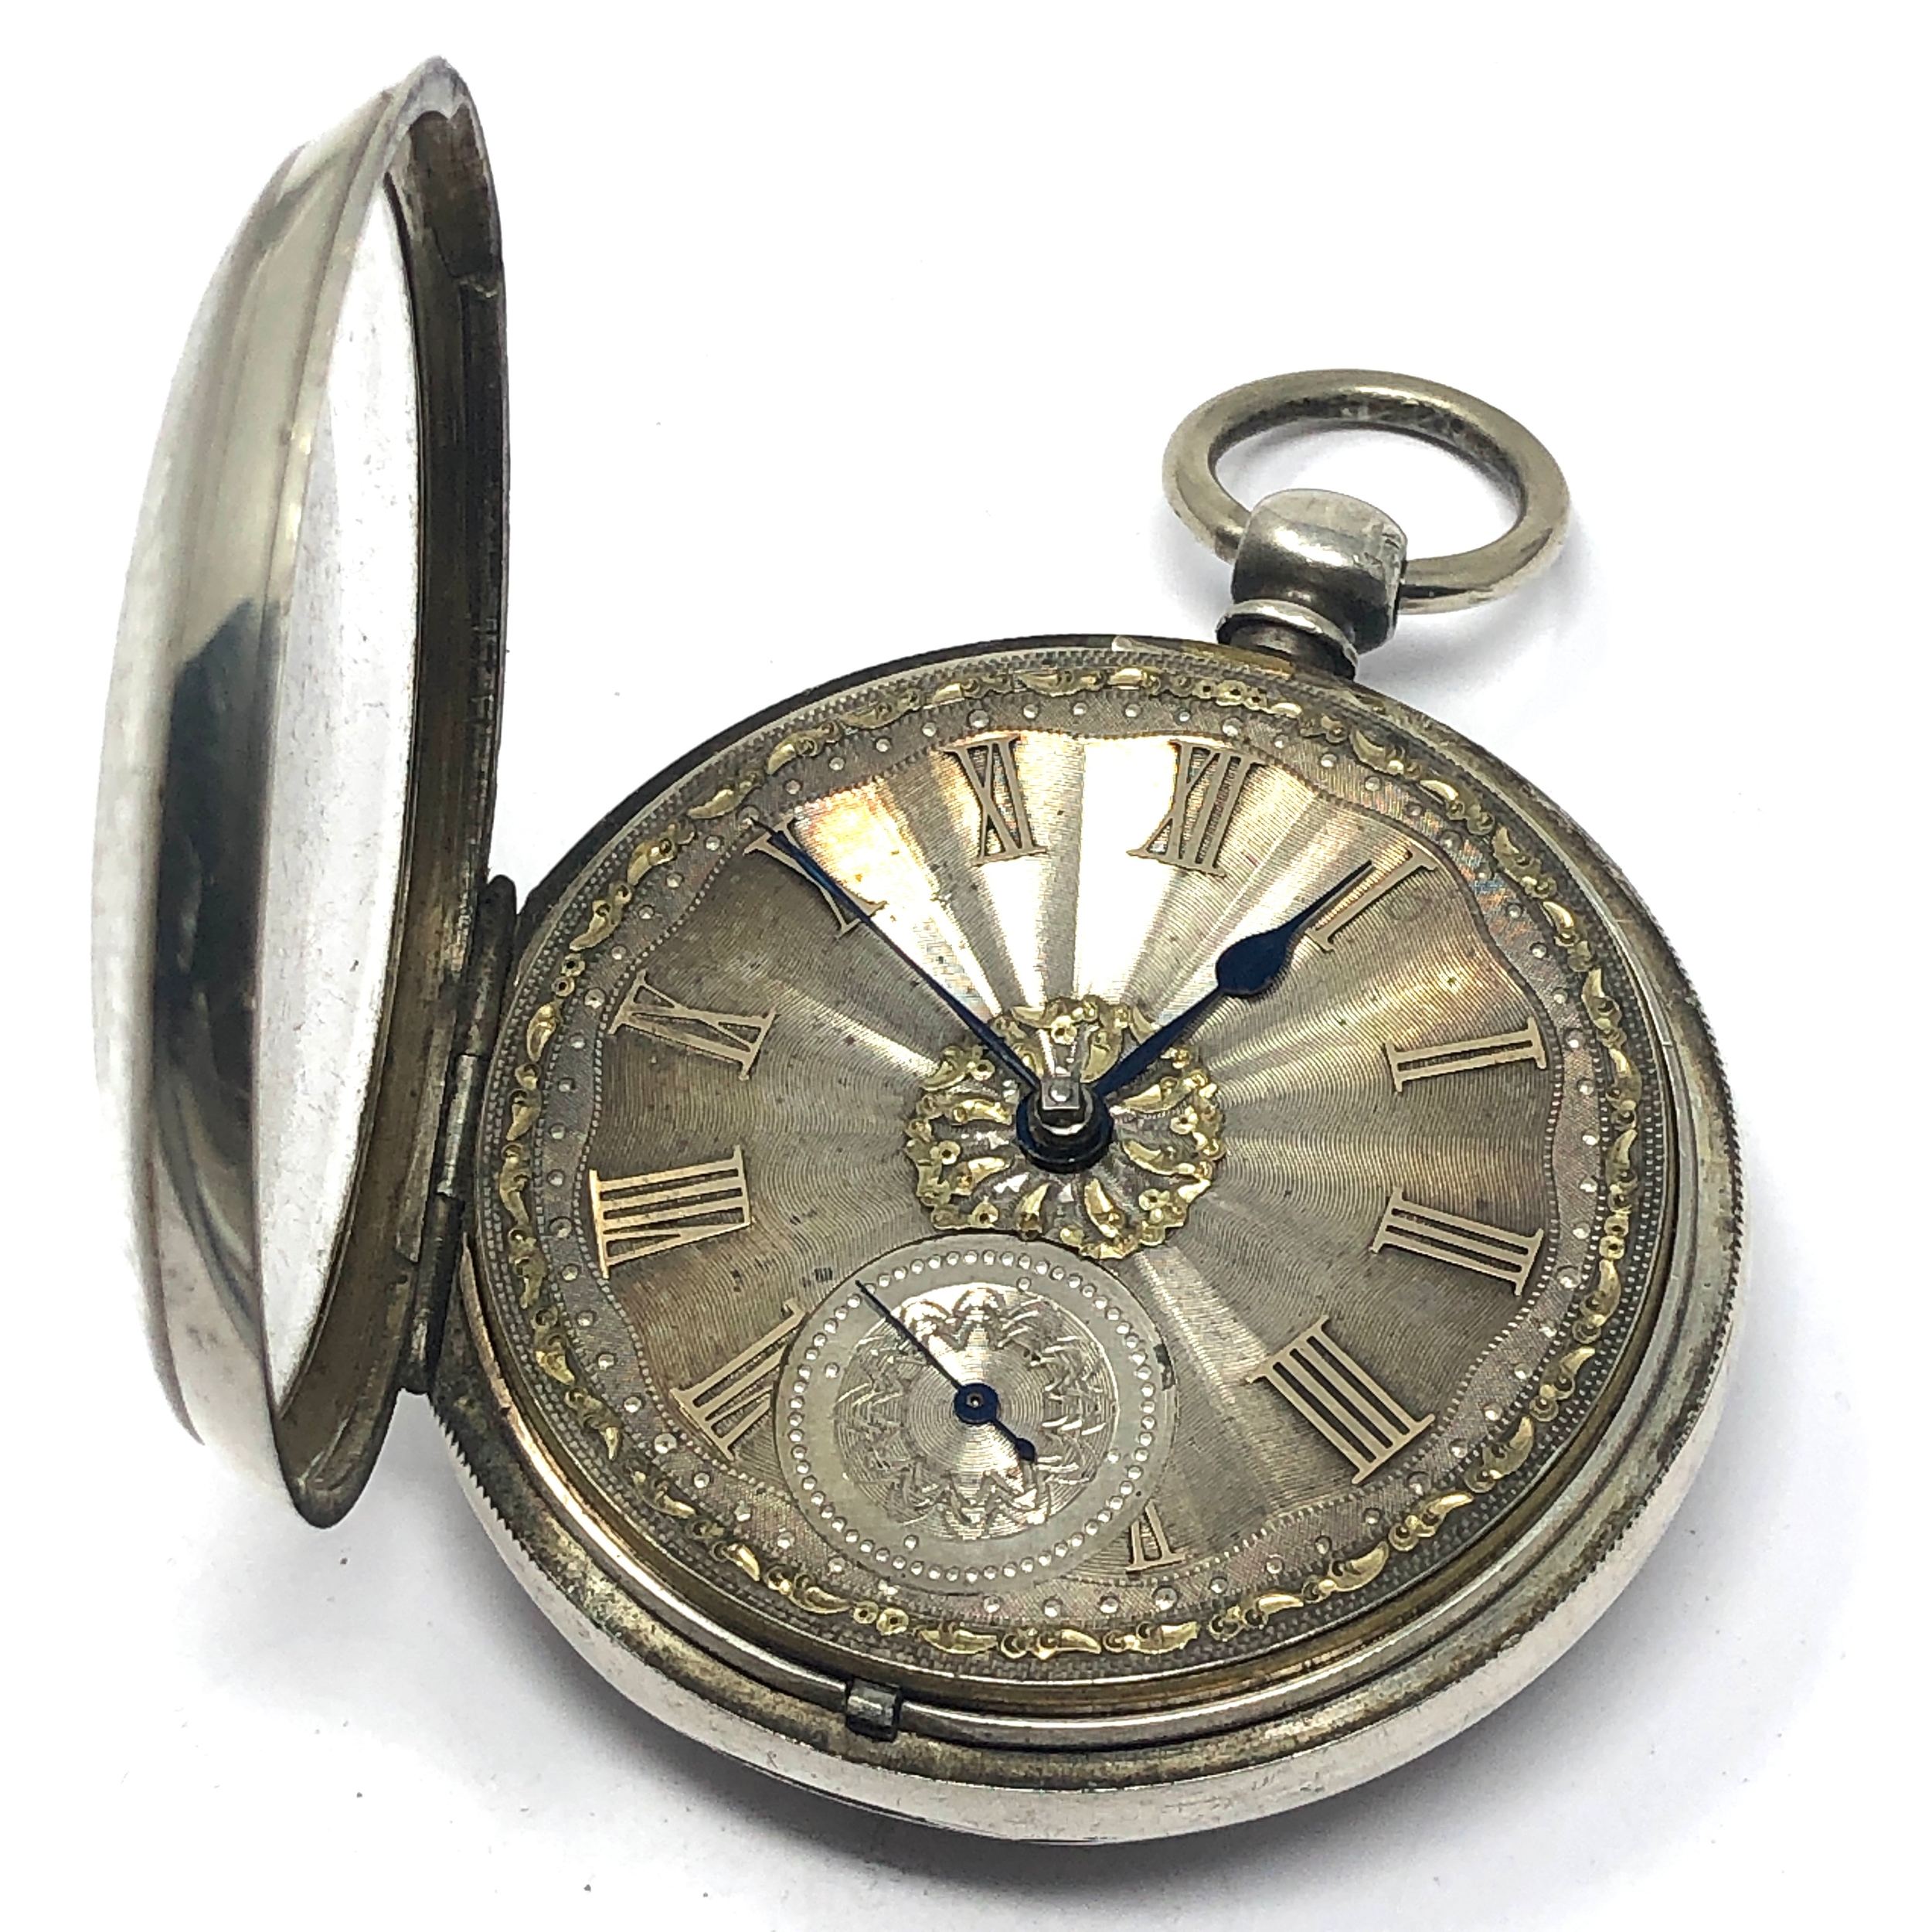 Antique silver dial open face fusee pocket watch the watch is untested not ticking